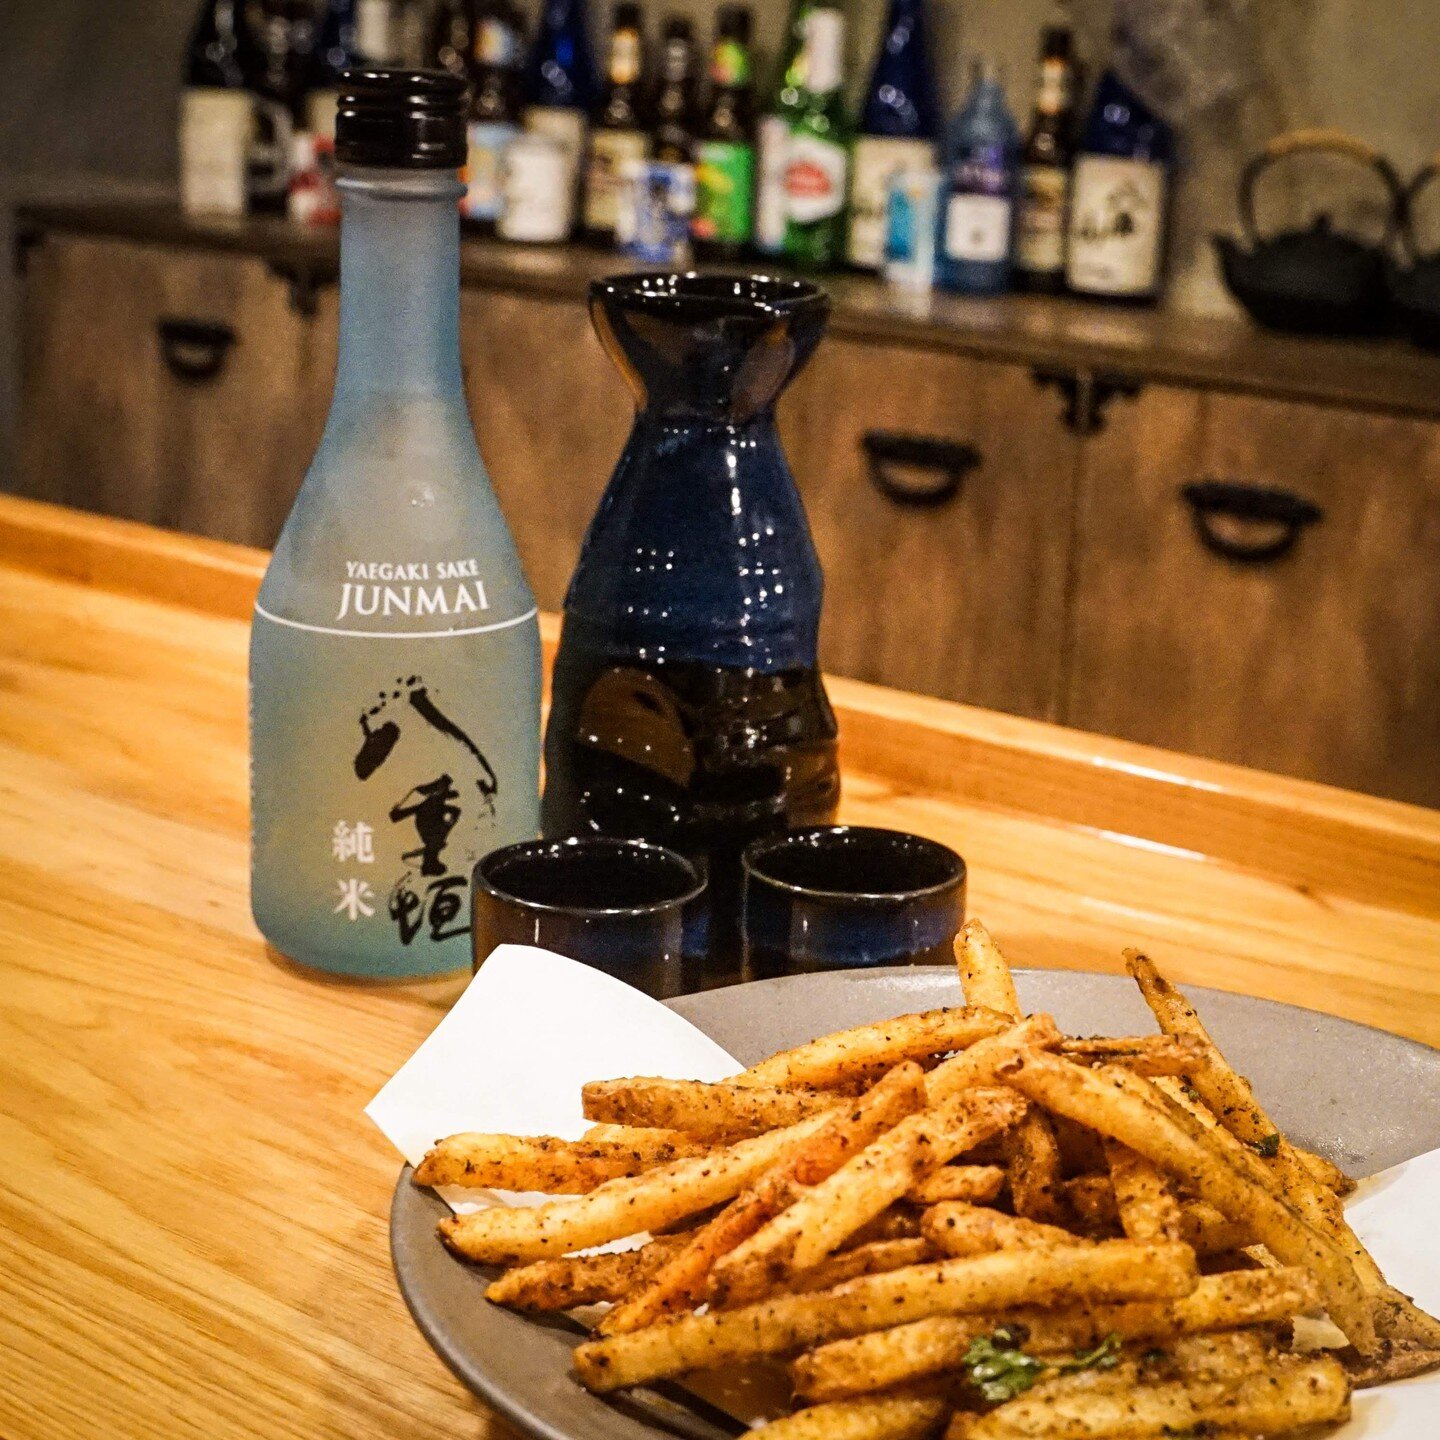 Come in and enjoy some hot sake🍶 and pair it with our Gachi Fries🎉

#ramengachi #houstonrestaurant #houstonramen #htxfood